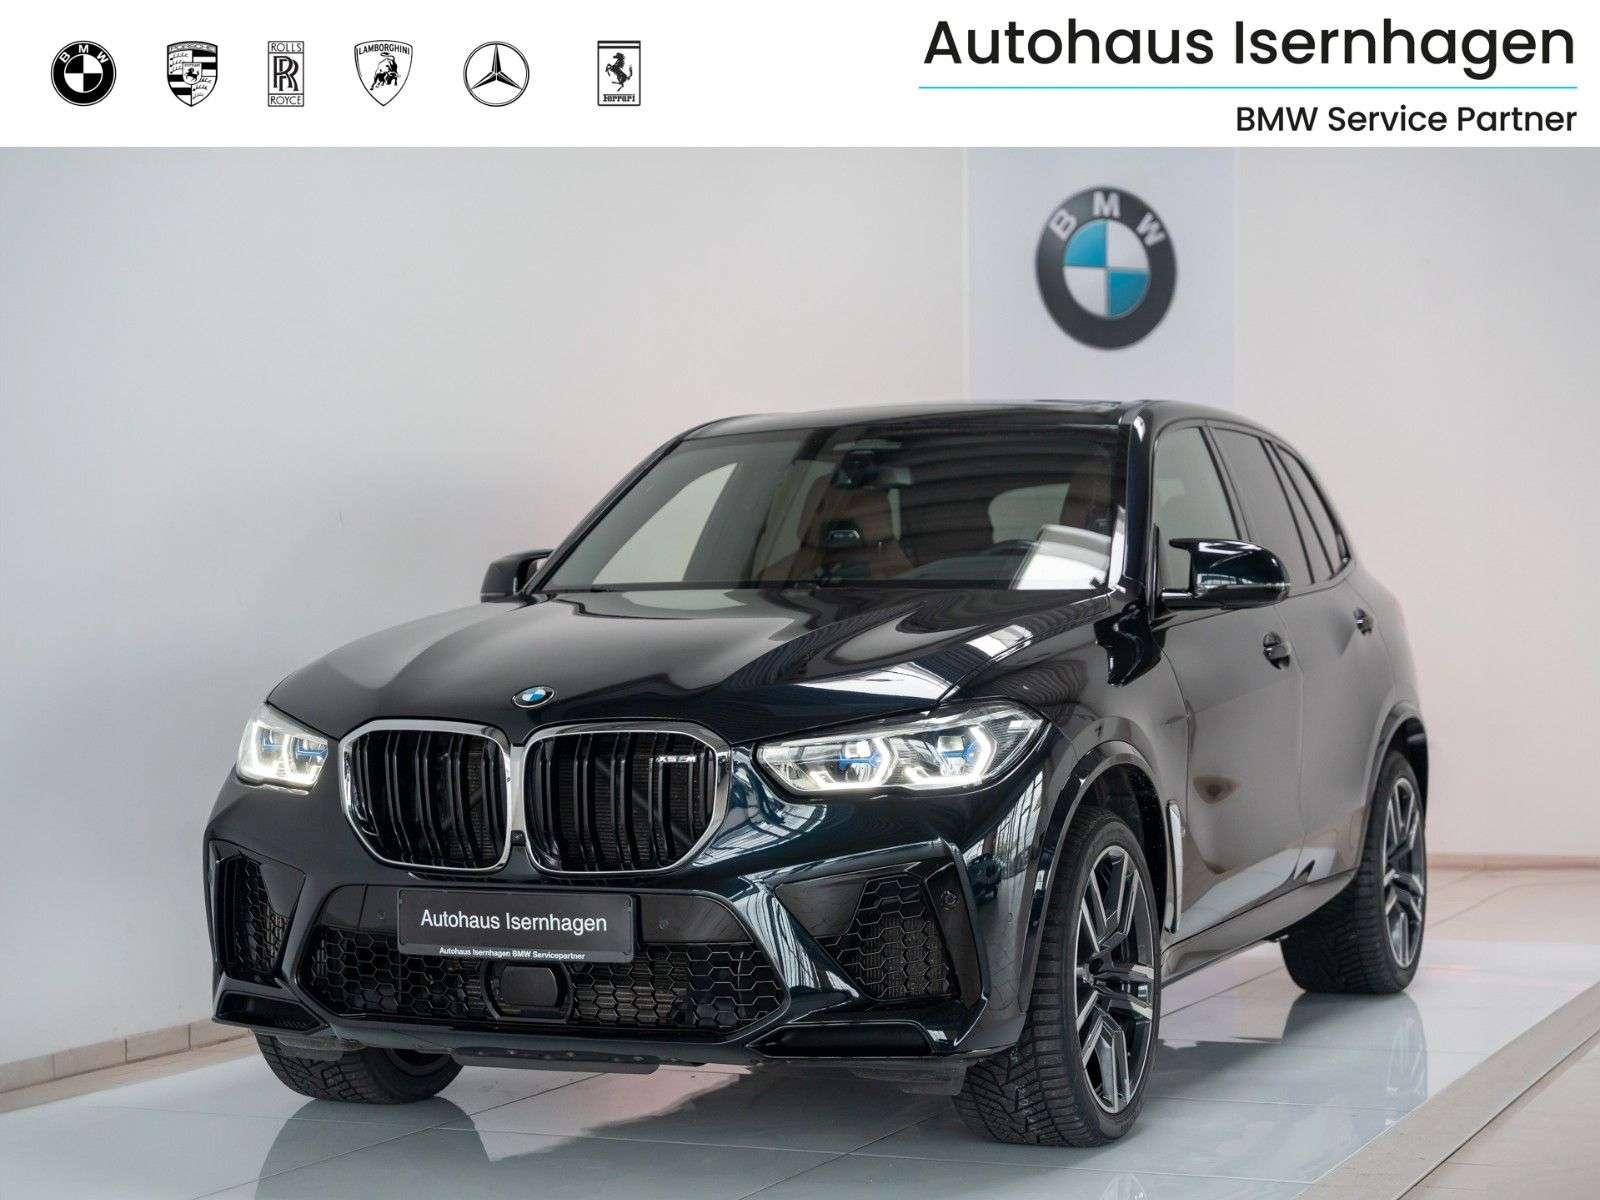 BMW X5 M Off-Road/Pick-up in Black used in Isernhagen for € 86,999.-